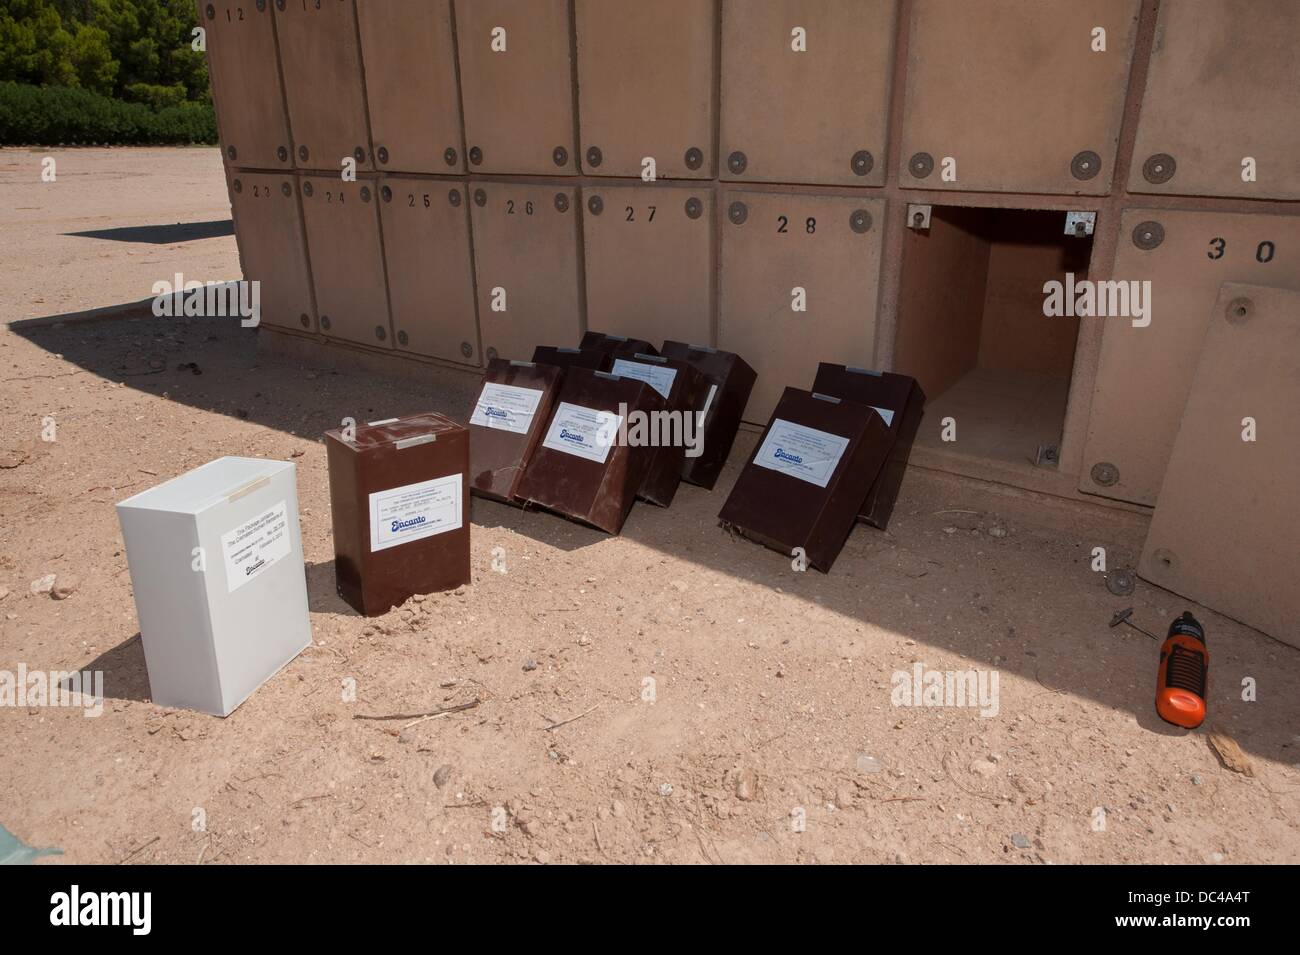 Tucson, Arizona, USA. 7th Aug, 2013. Boxes of cremated remains, likely all border crossers who died making the trek north, sit in the sun after being removed from their columbarium niche while a funeral director searches the niche for the remains of a Honduran man who might have been identified years after inurnment. The box on the left contains the remains of a man, ML12-1733, who was found in a migrant corridor just west of Tucson in July, 2012. The Pima County Medical Examiner estimated his age at 23-40 years, and described the partial skeletal remains as those of a Hispanic. Stock Photo